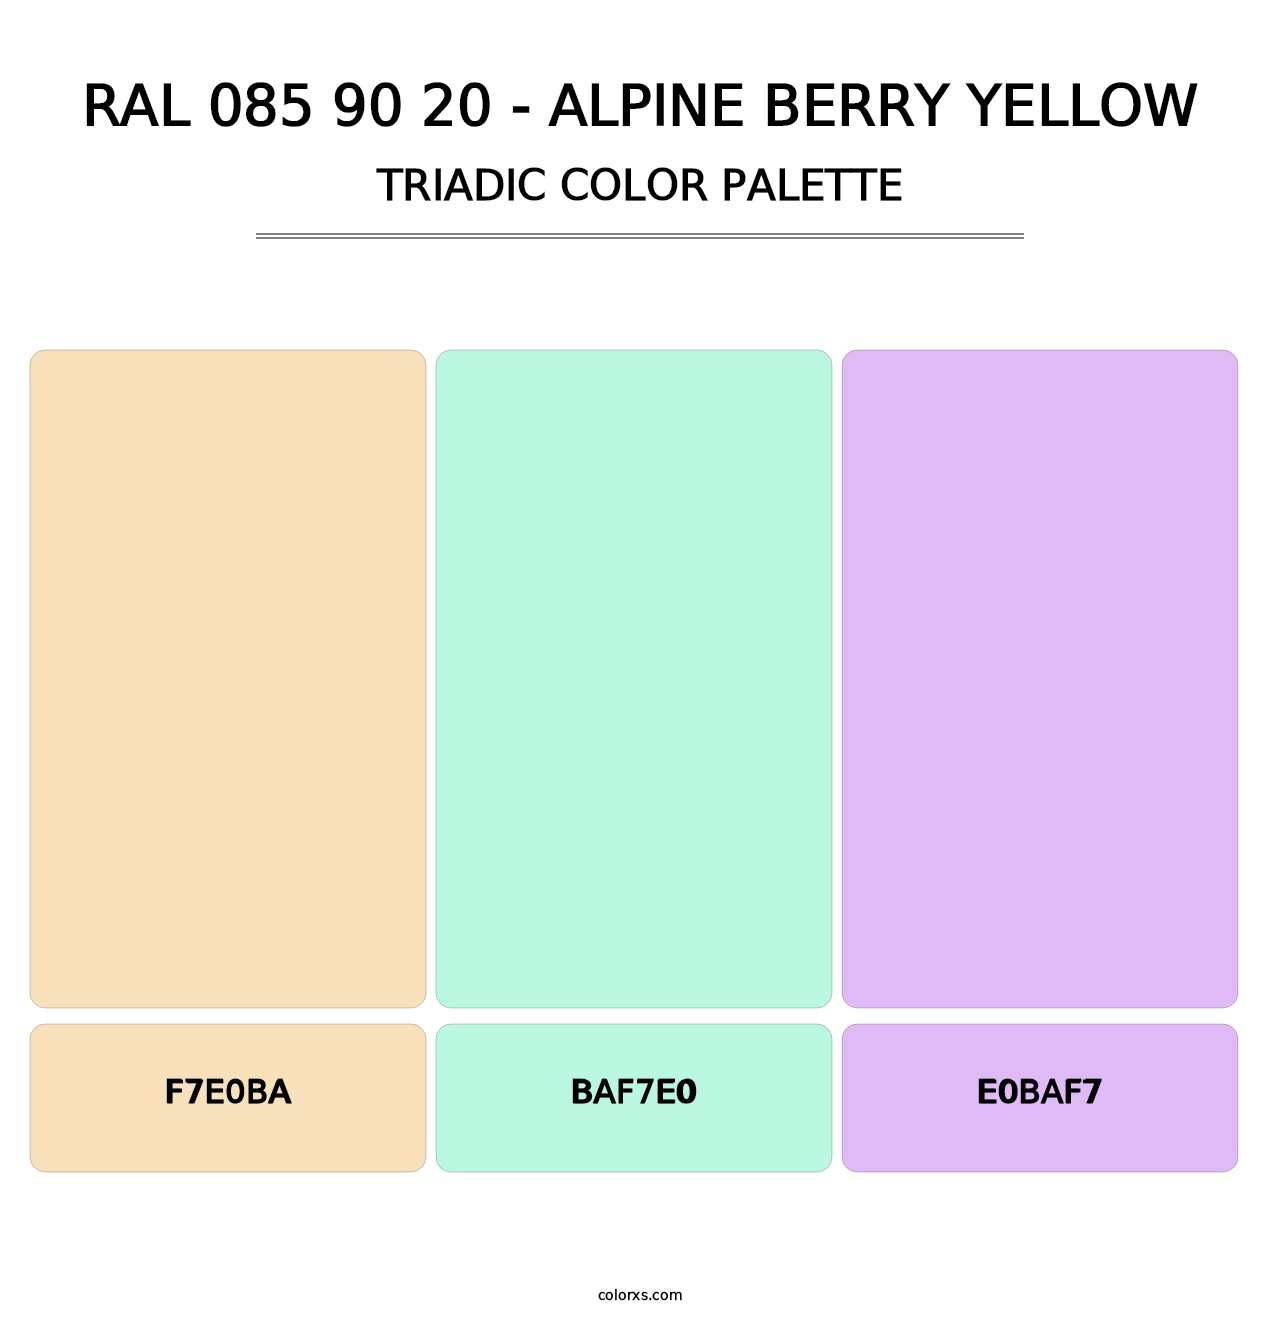 RAL 085 90 20 - Alpine Berry Yellow - Triadic Color Palette